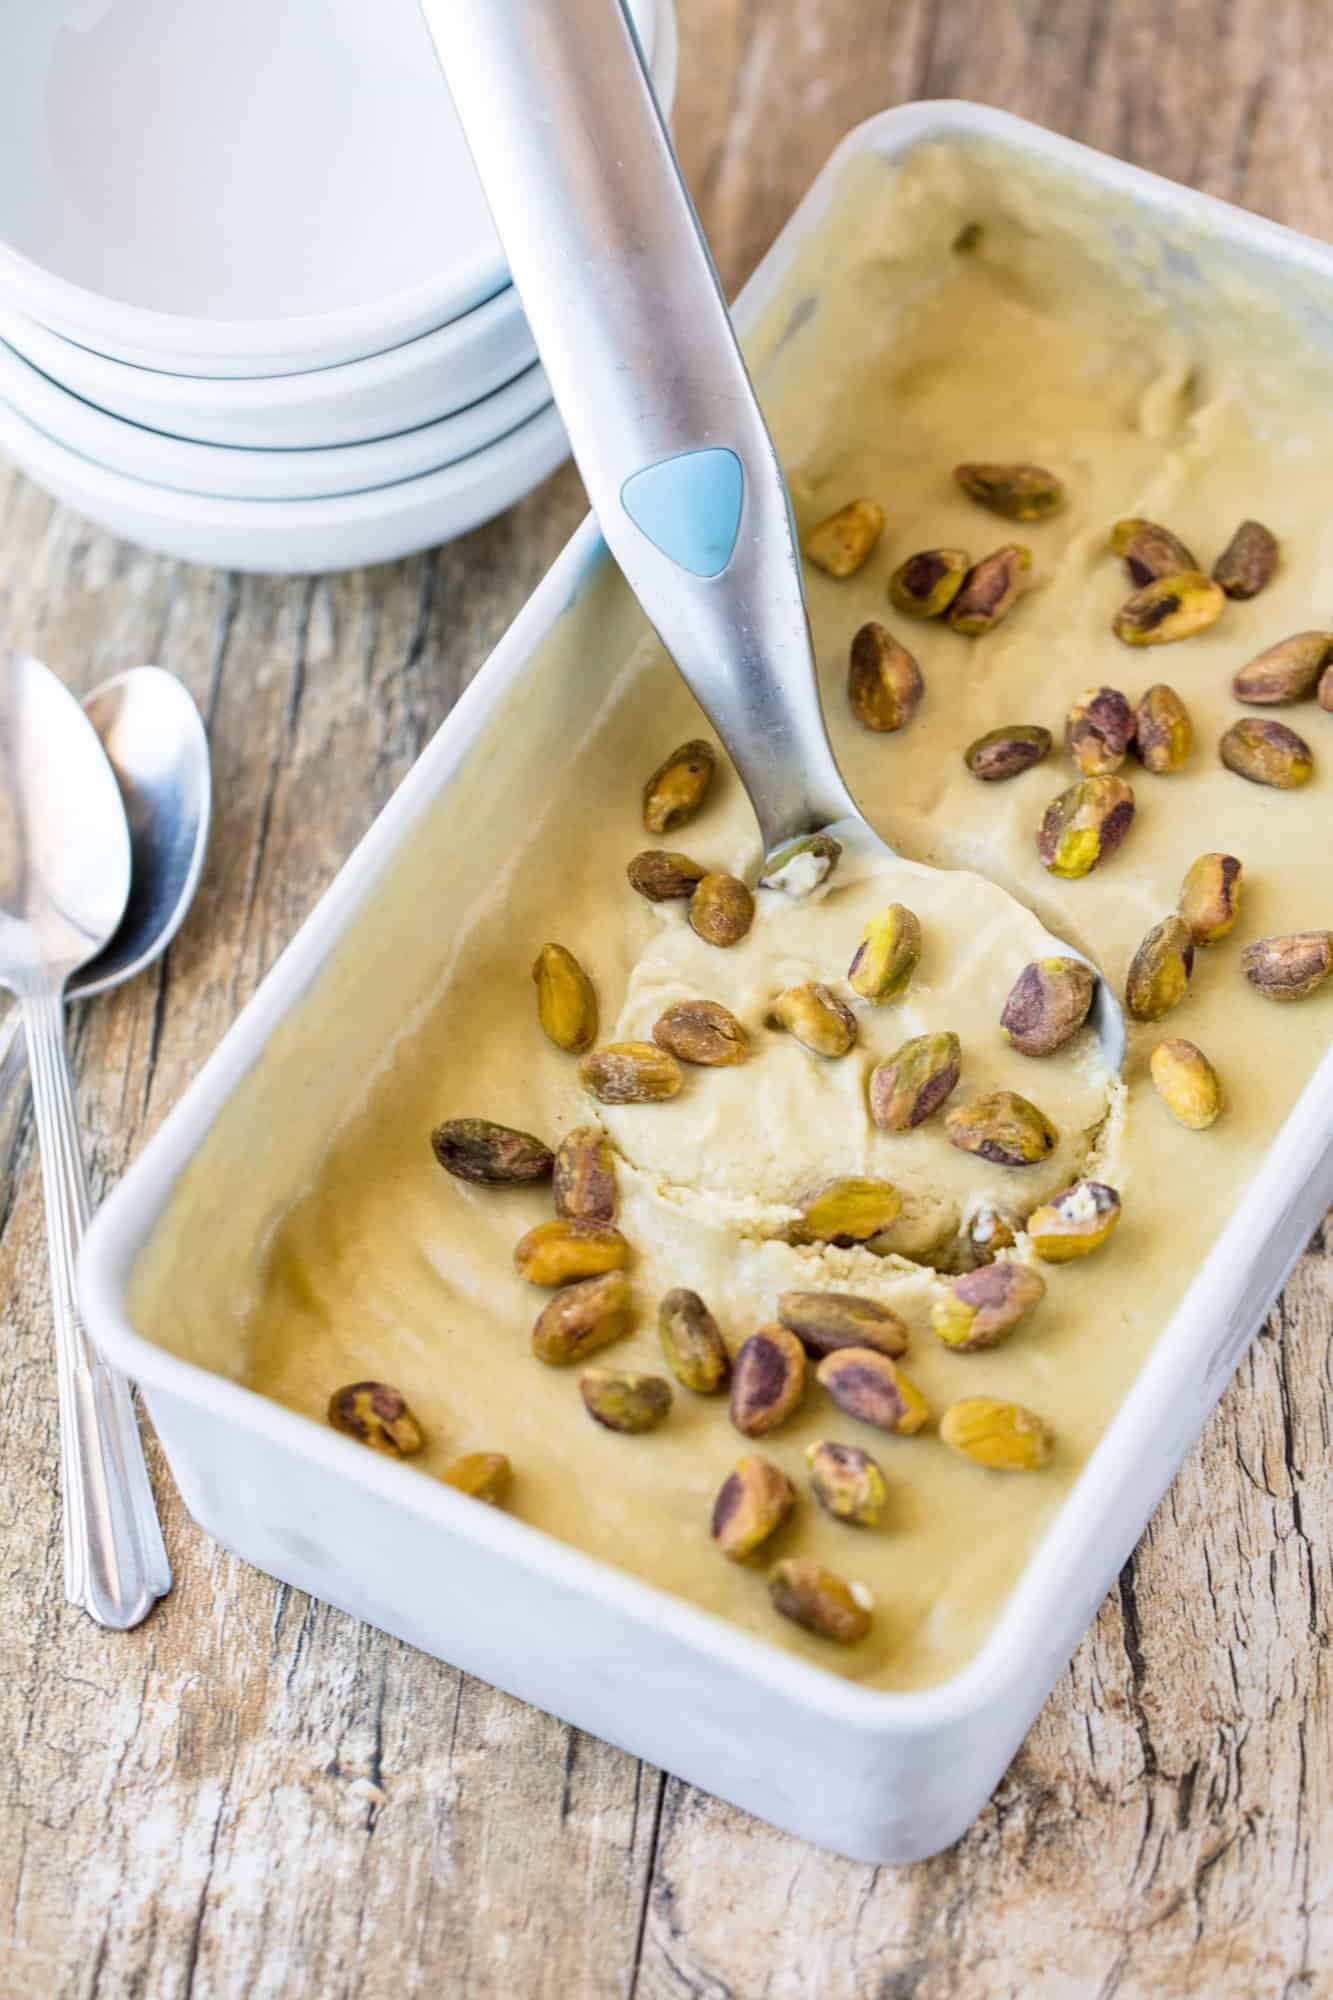 Learn How to Make Homemade Gelato By Hand without the use of an ice cream maker. Make it the old fashioned way! This Pistachio Gelato is a total winner.